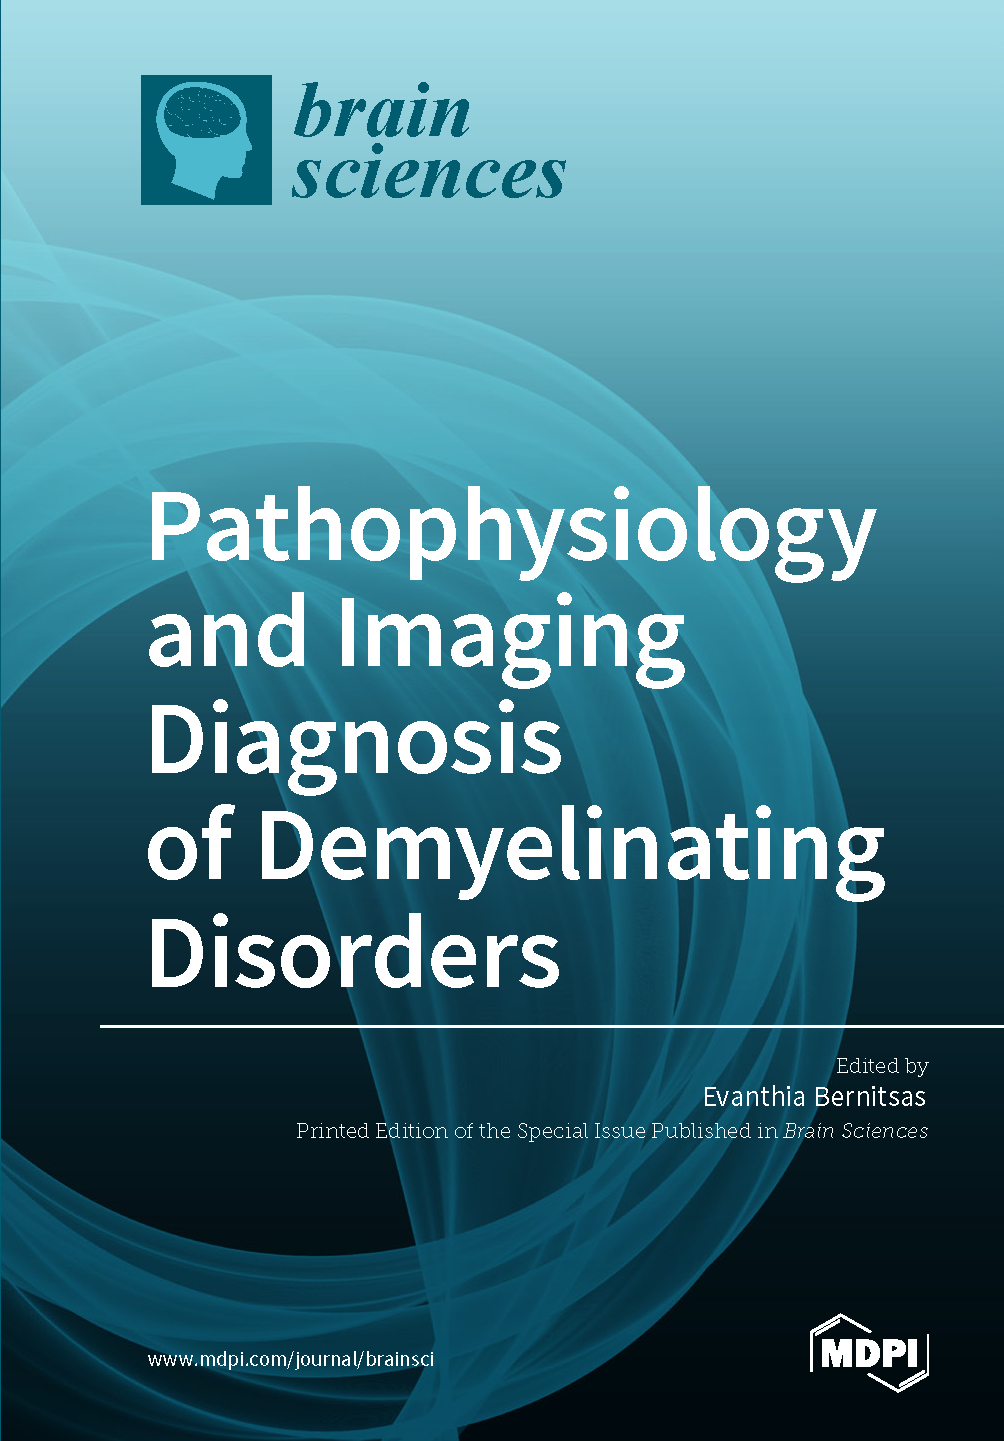 Pathophysiology and Imaging Diagnosis of Demyelinating Disorders